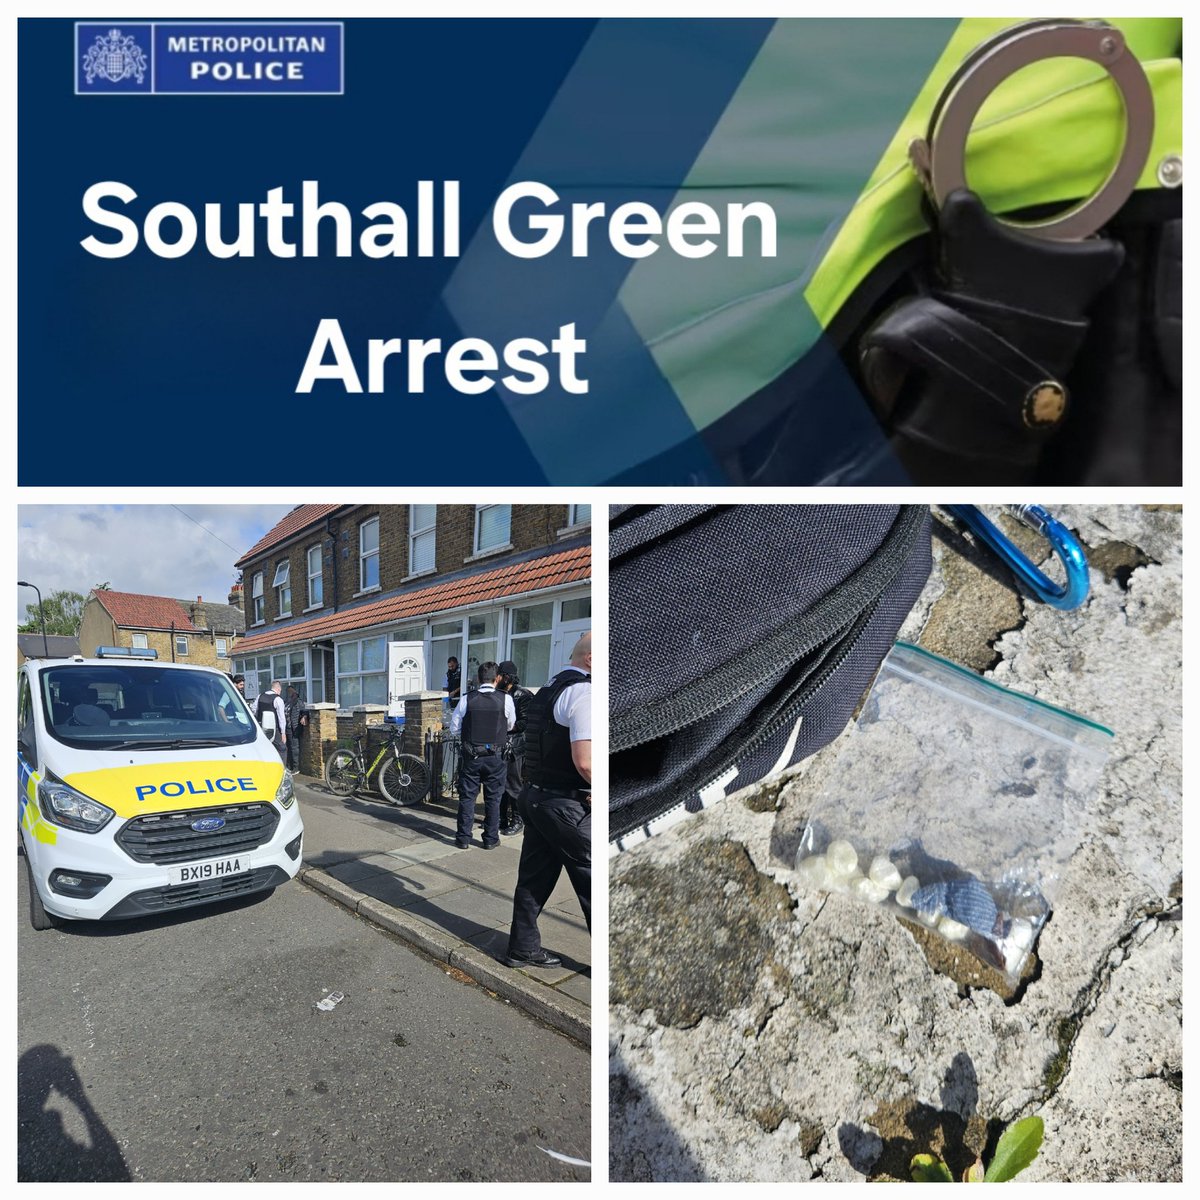 The team was patrolling Guru Nanak Road. Two males were seen acting suspiciously and detained for searches. 

▶️ one arrested for drug offences, immigration absconding, and breach of community protection notice 

#notonourwatch